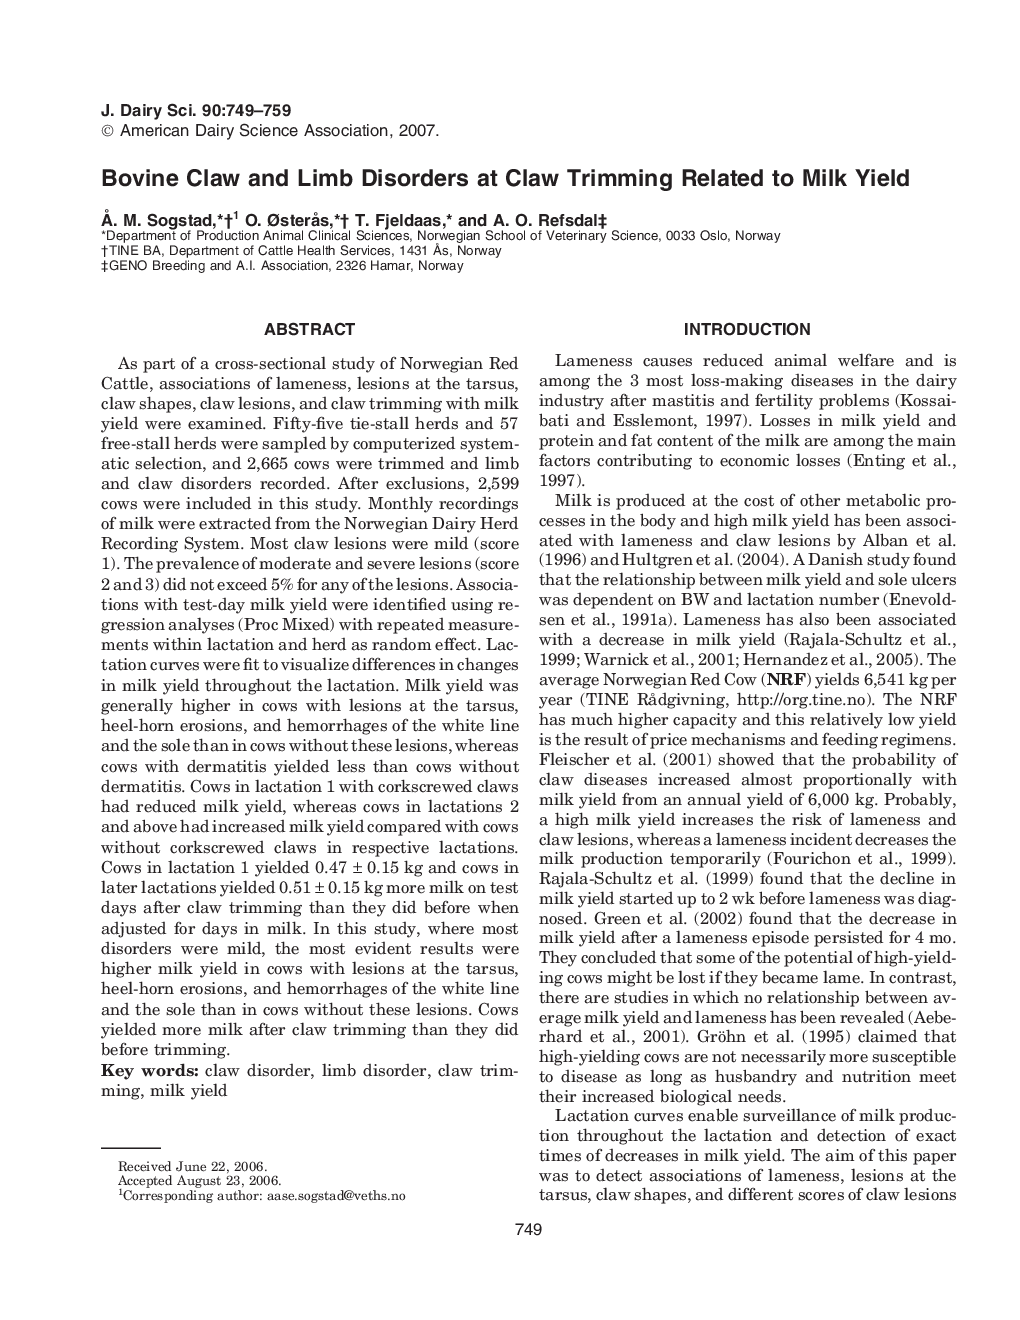 Bovine Claw and Limb Disorders at Claw Trimming Related to Milk Yield